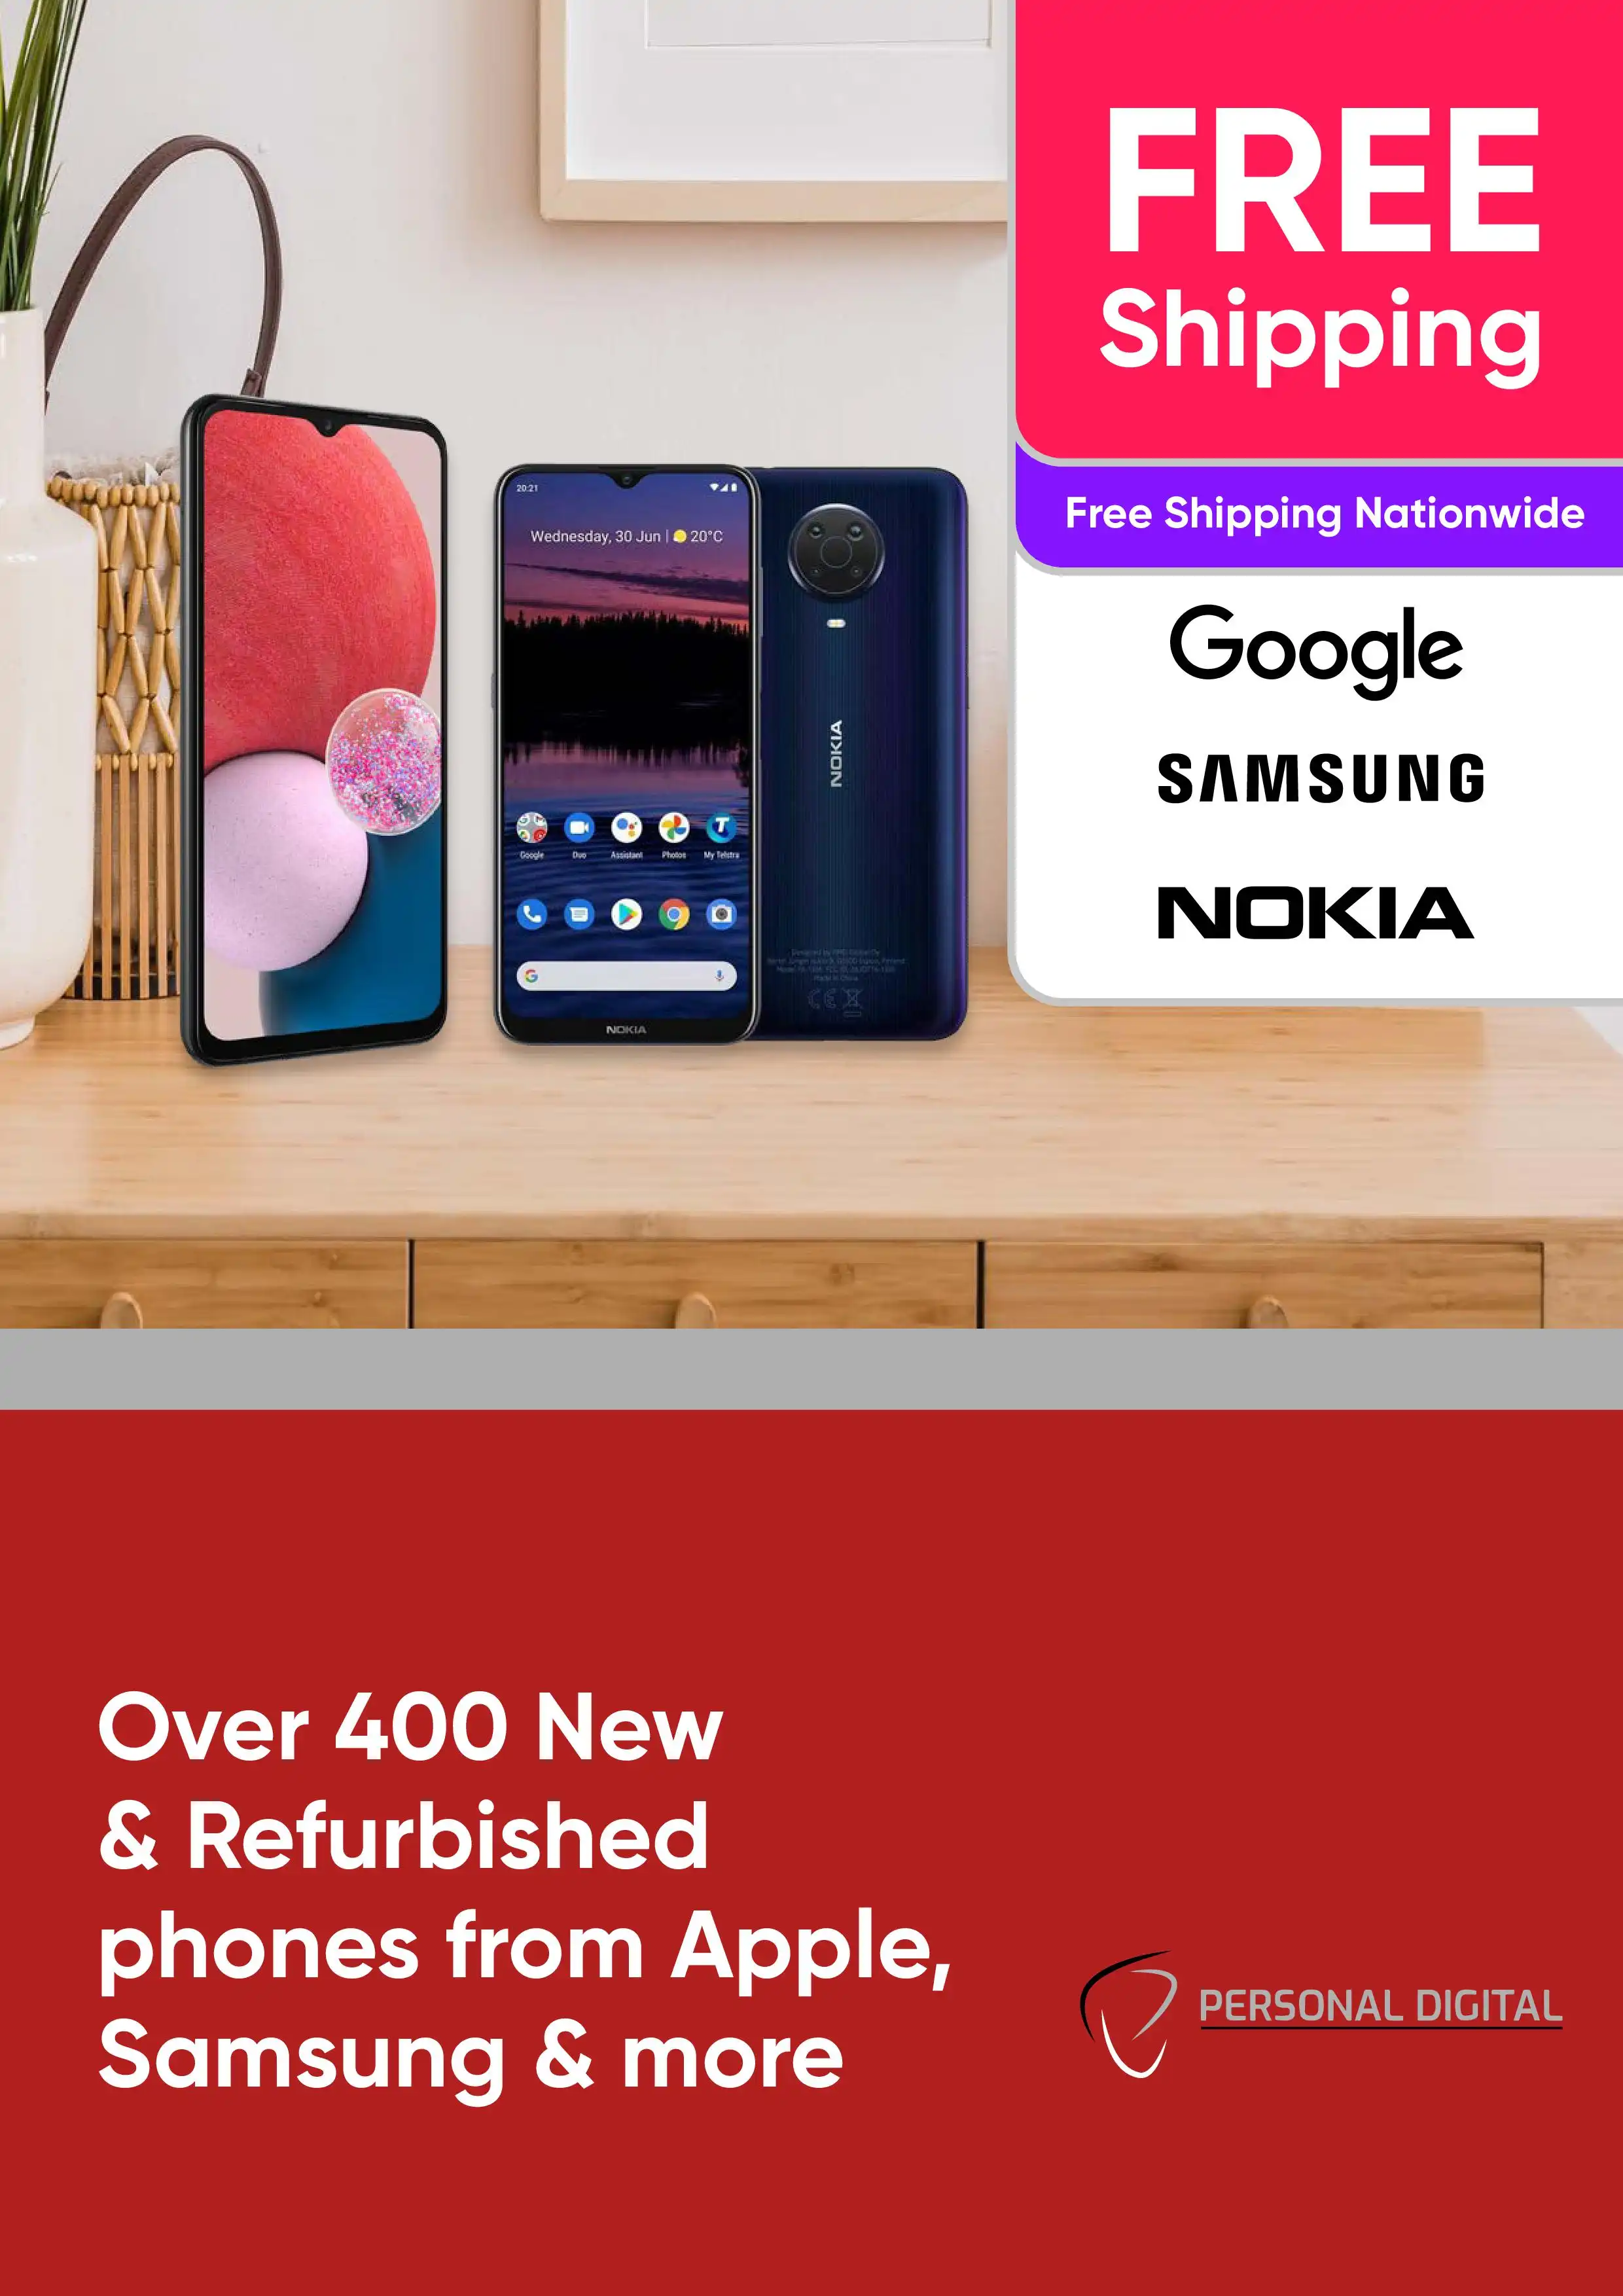 Over 400 New & Refurbished phones from Apple, Samsung & more